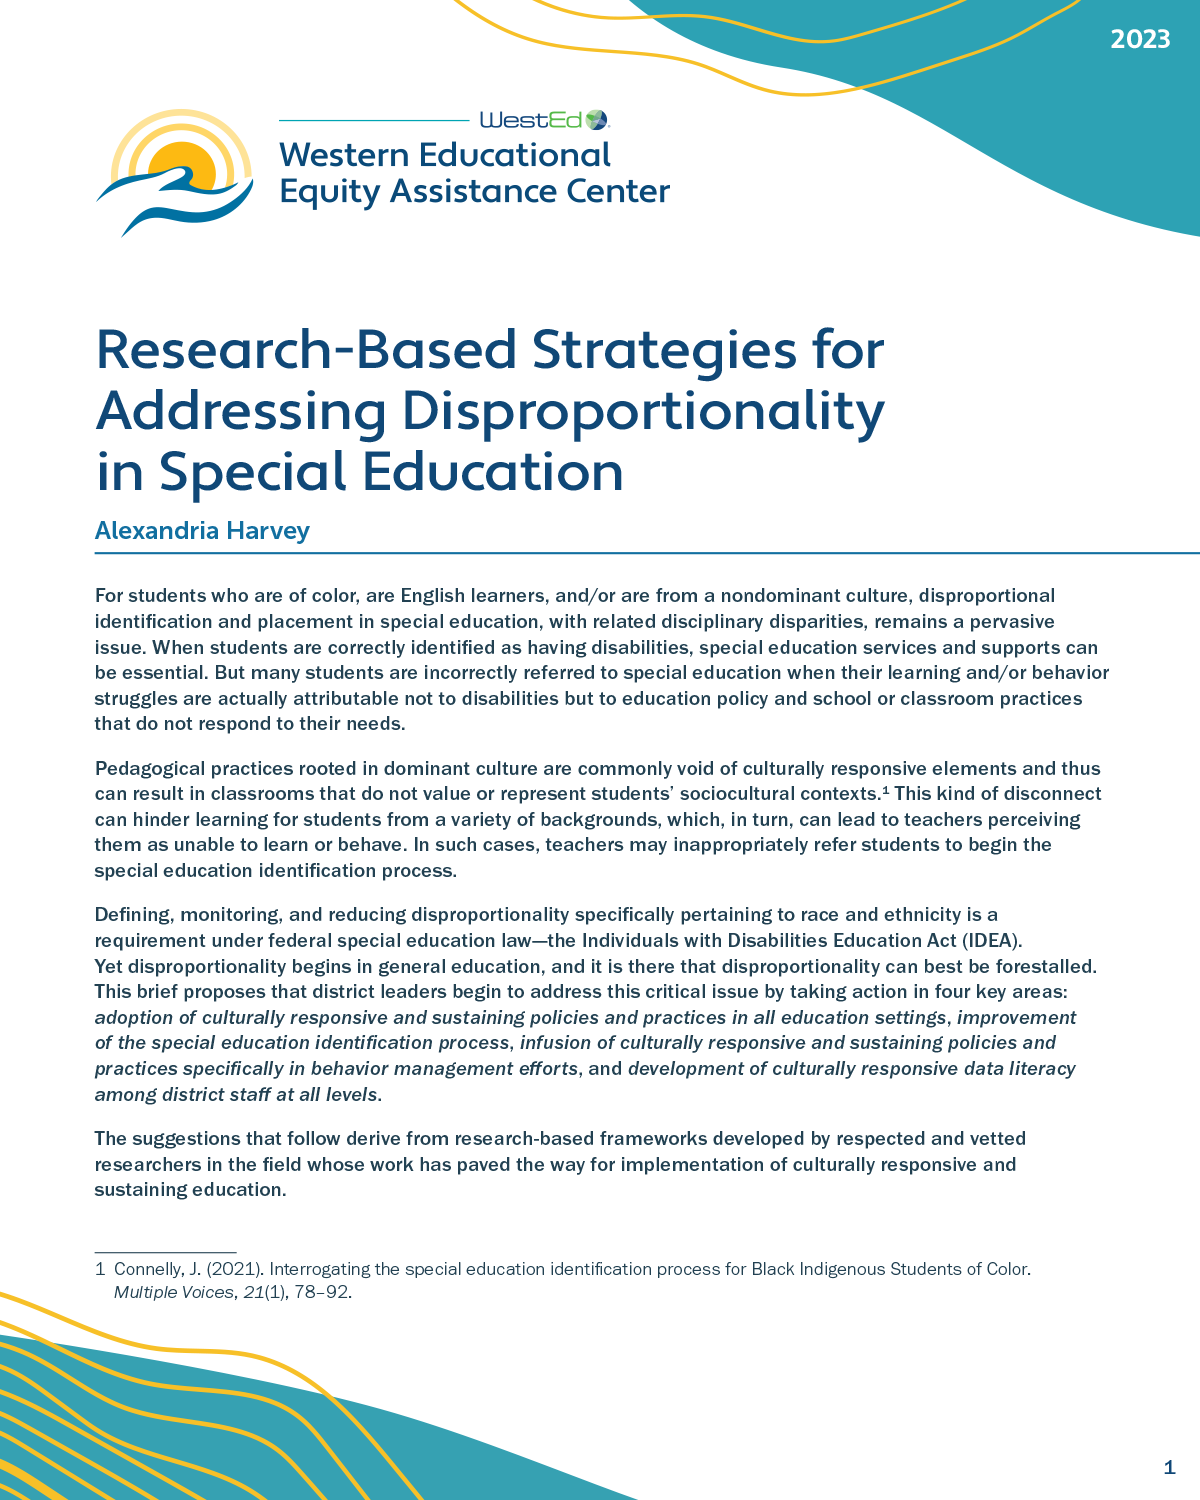 Research-Based Strategies for Addressing Disproportionality in Special Education